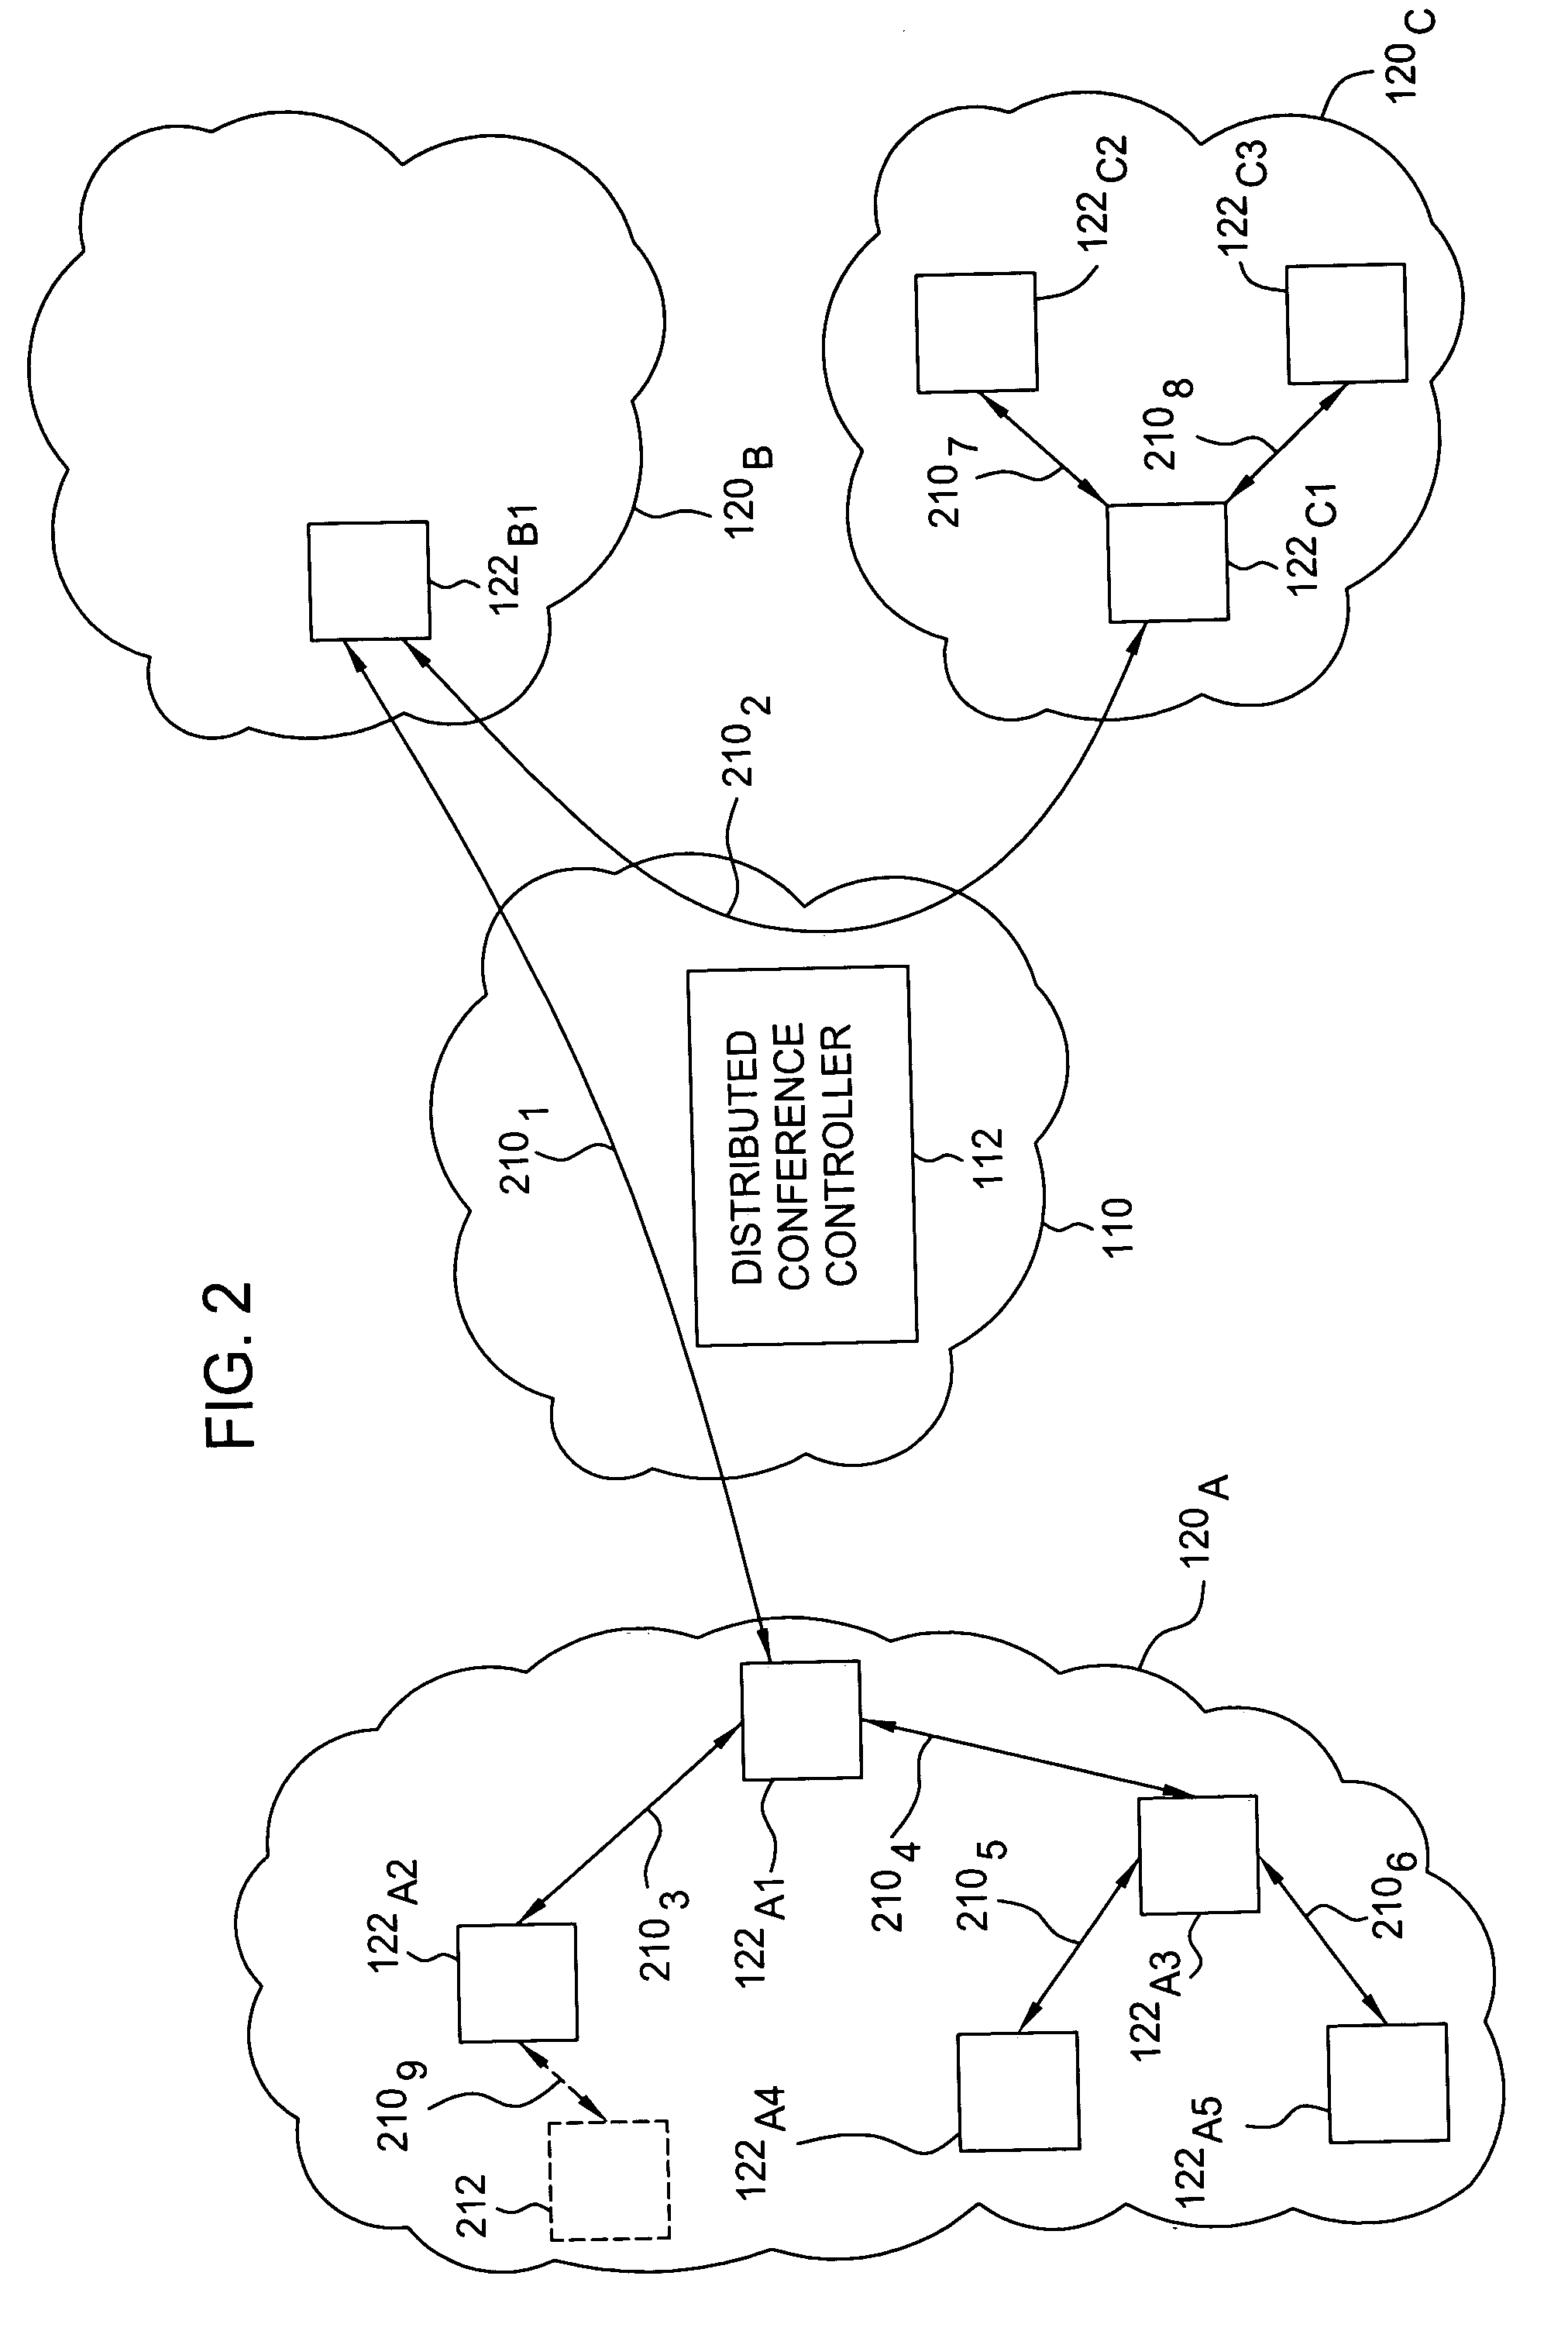 Method and apparatus for establishing a distributed conference bridge